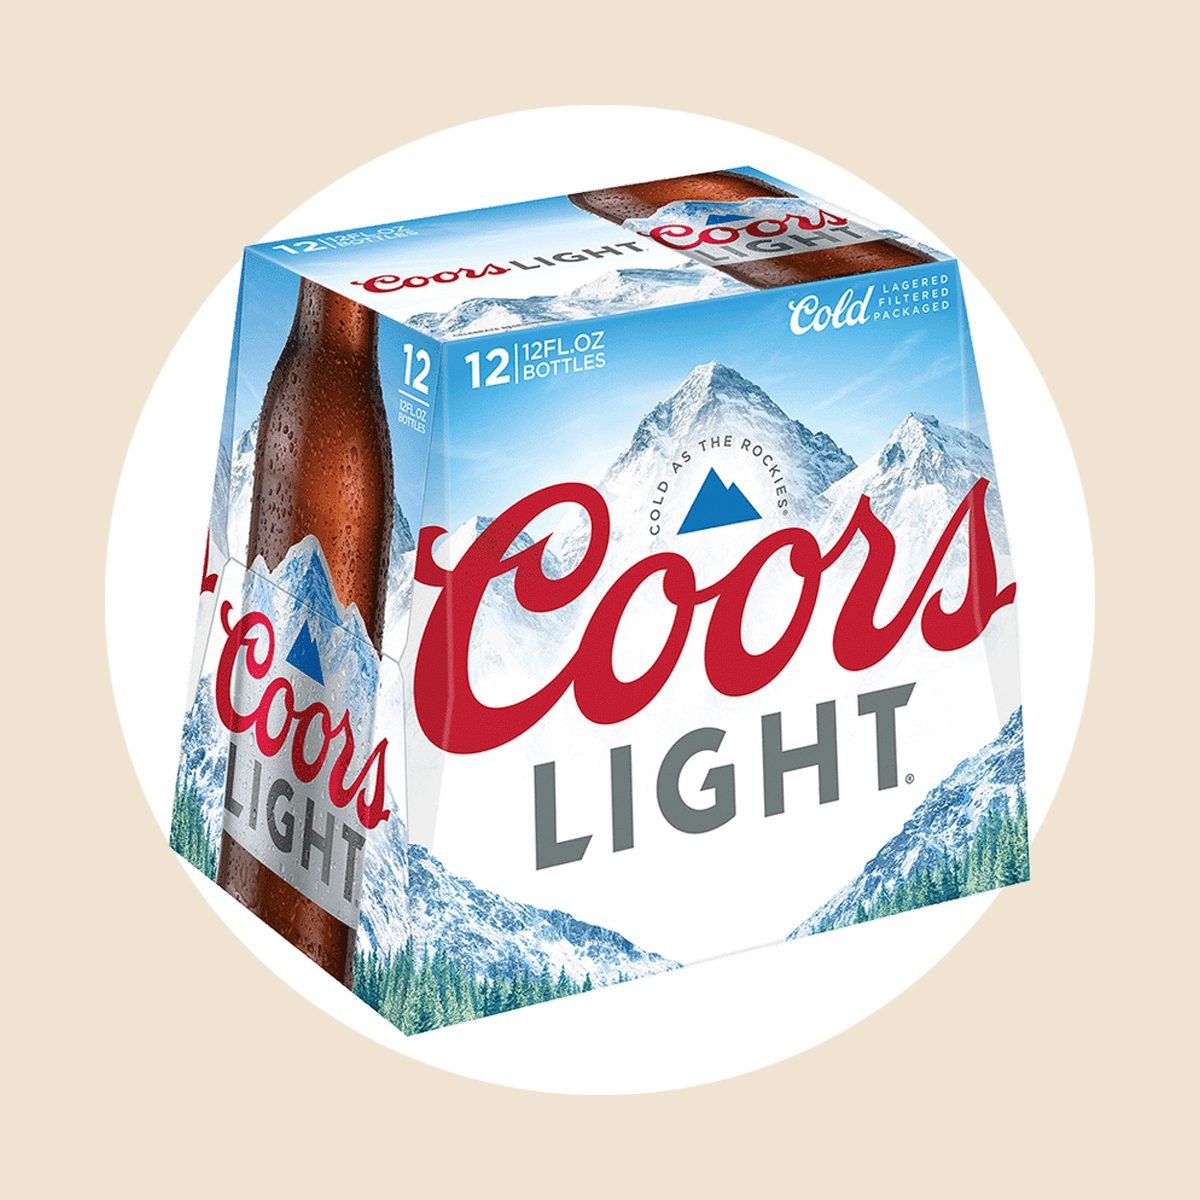 We Tried 10 These Are the Best Light Beer Brands You Can Buy